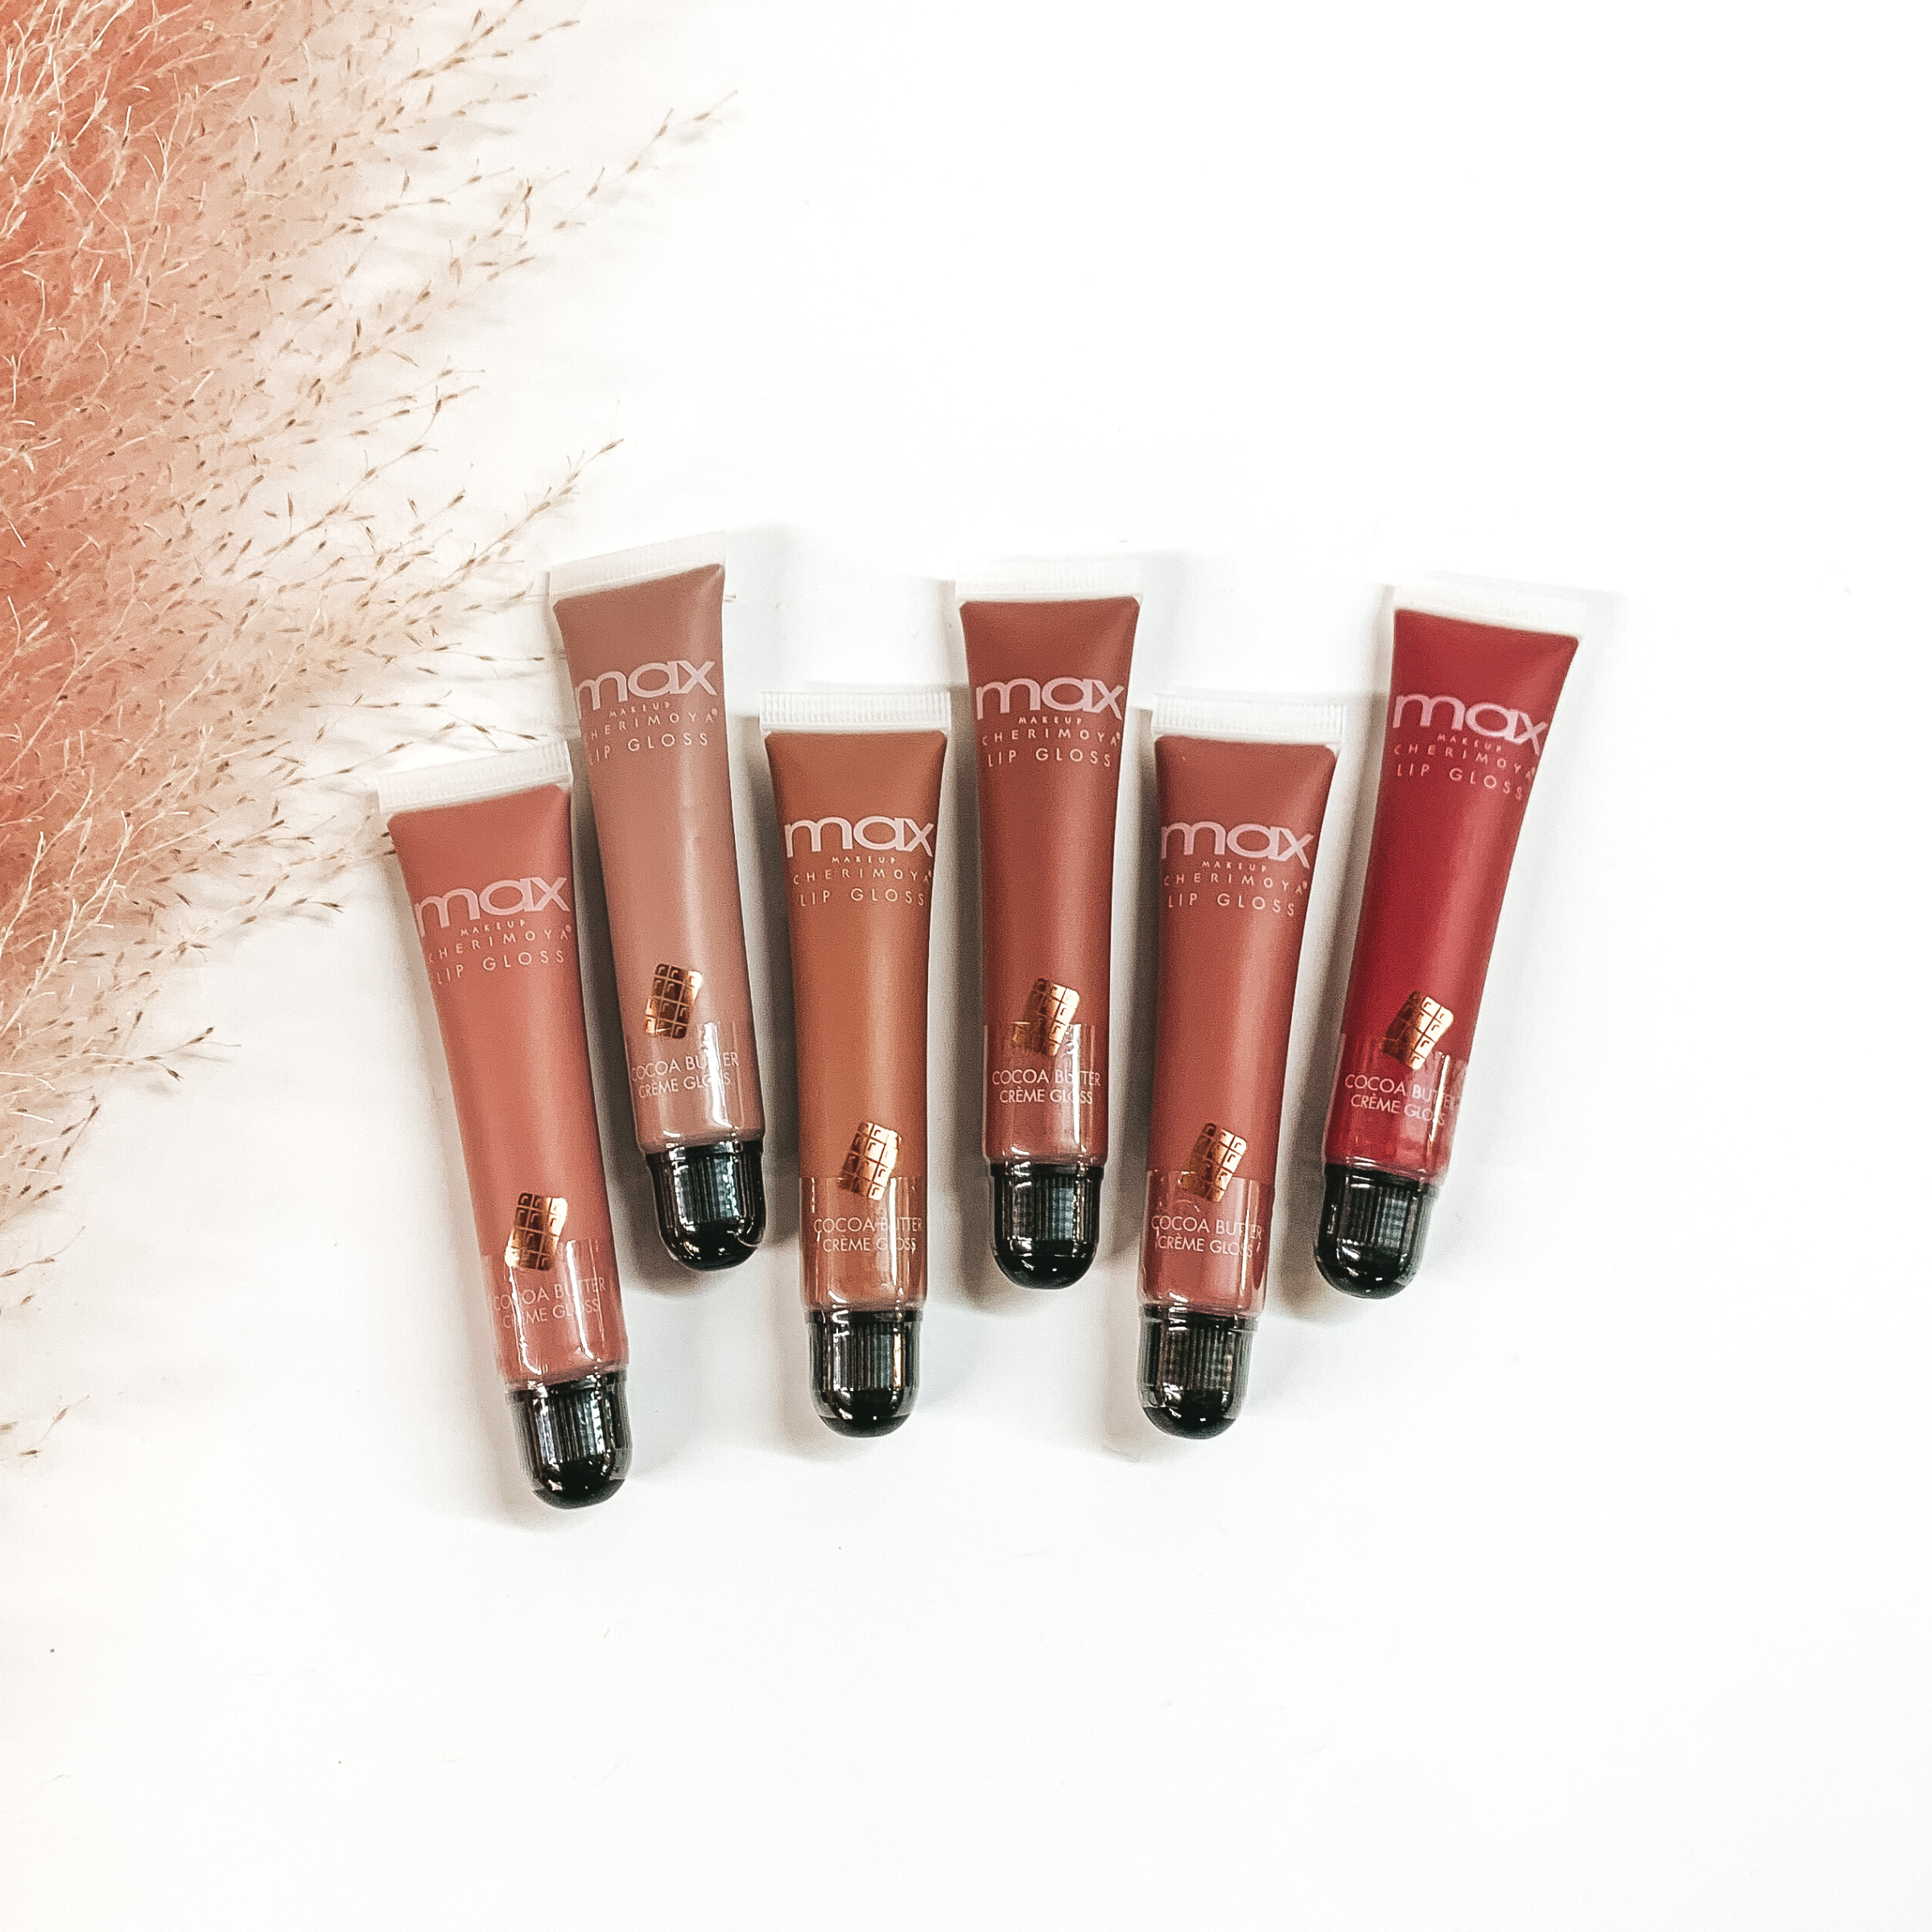 Buy 3 for $10 | Max Lip Gloss in Cocoa Butter